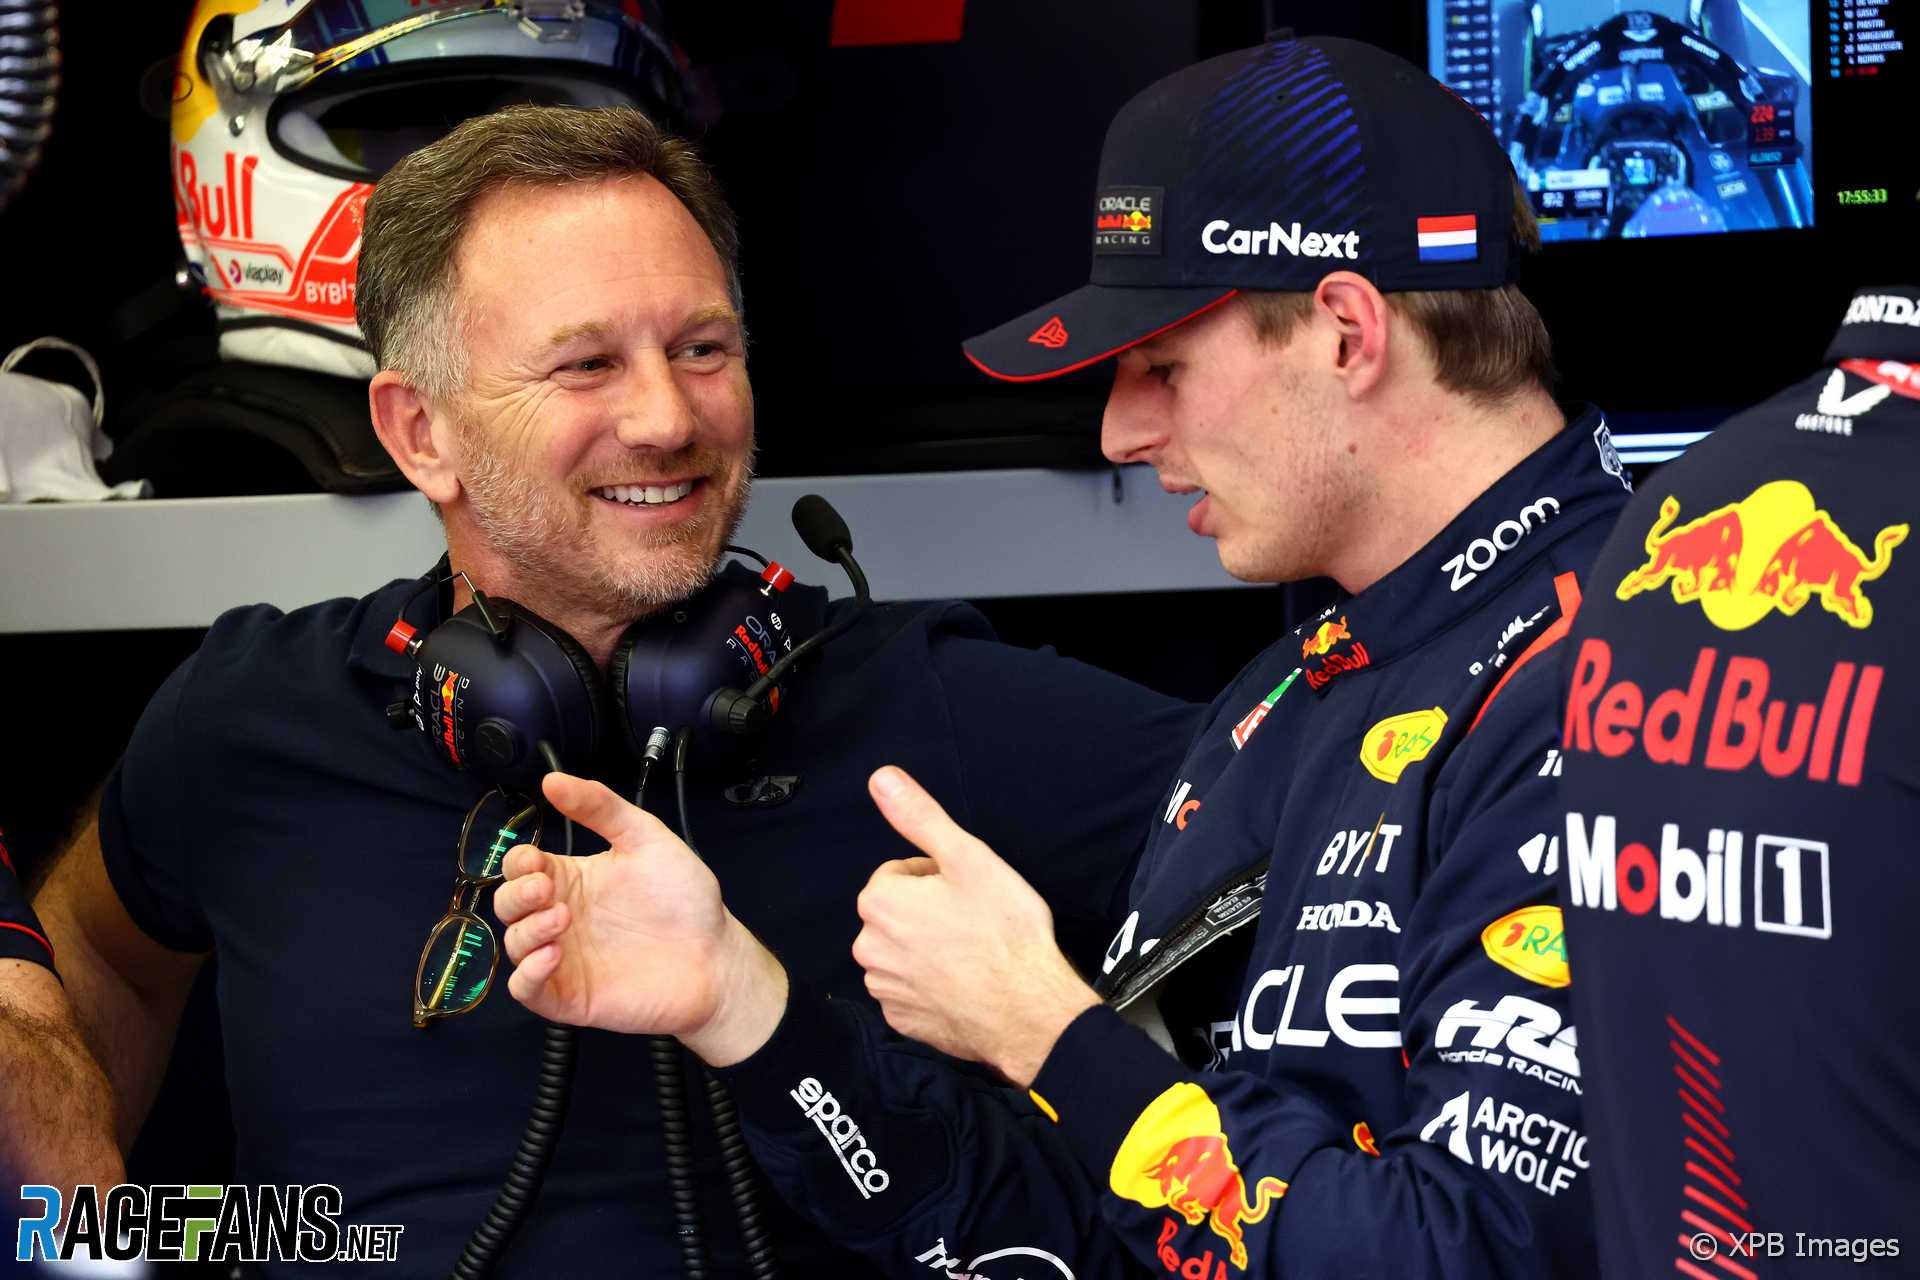 Verstappen pleased by "smooth day" after quickest lap and highest mileage · RaceFans - RaceFans